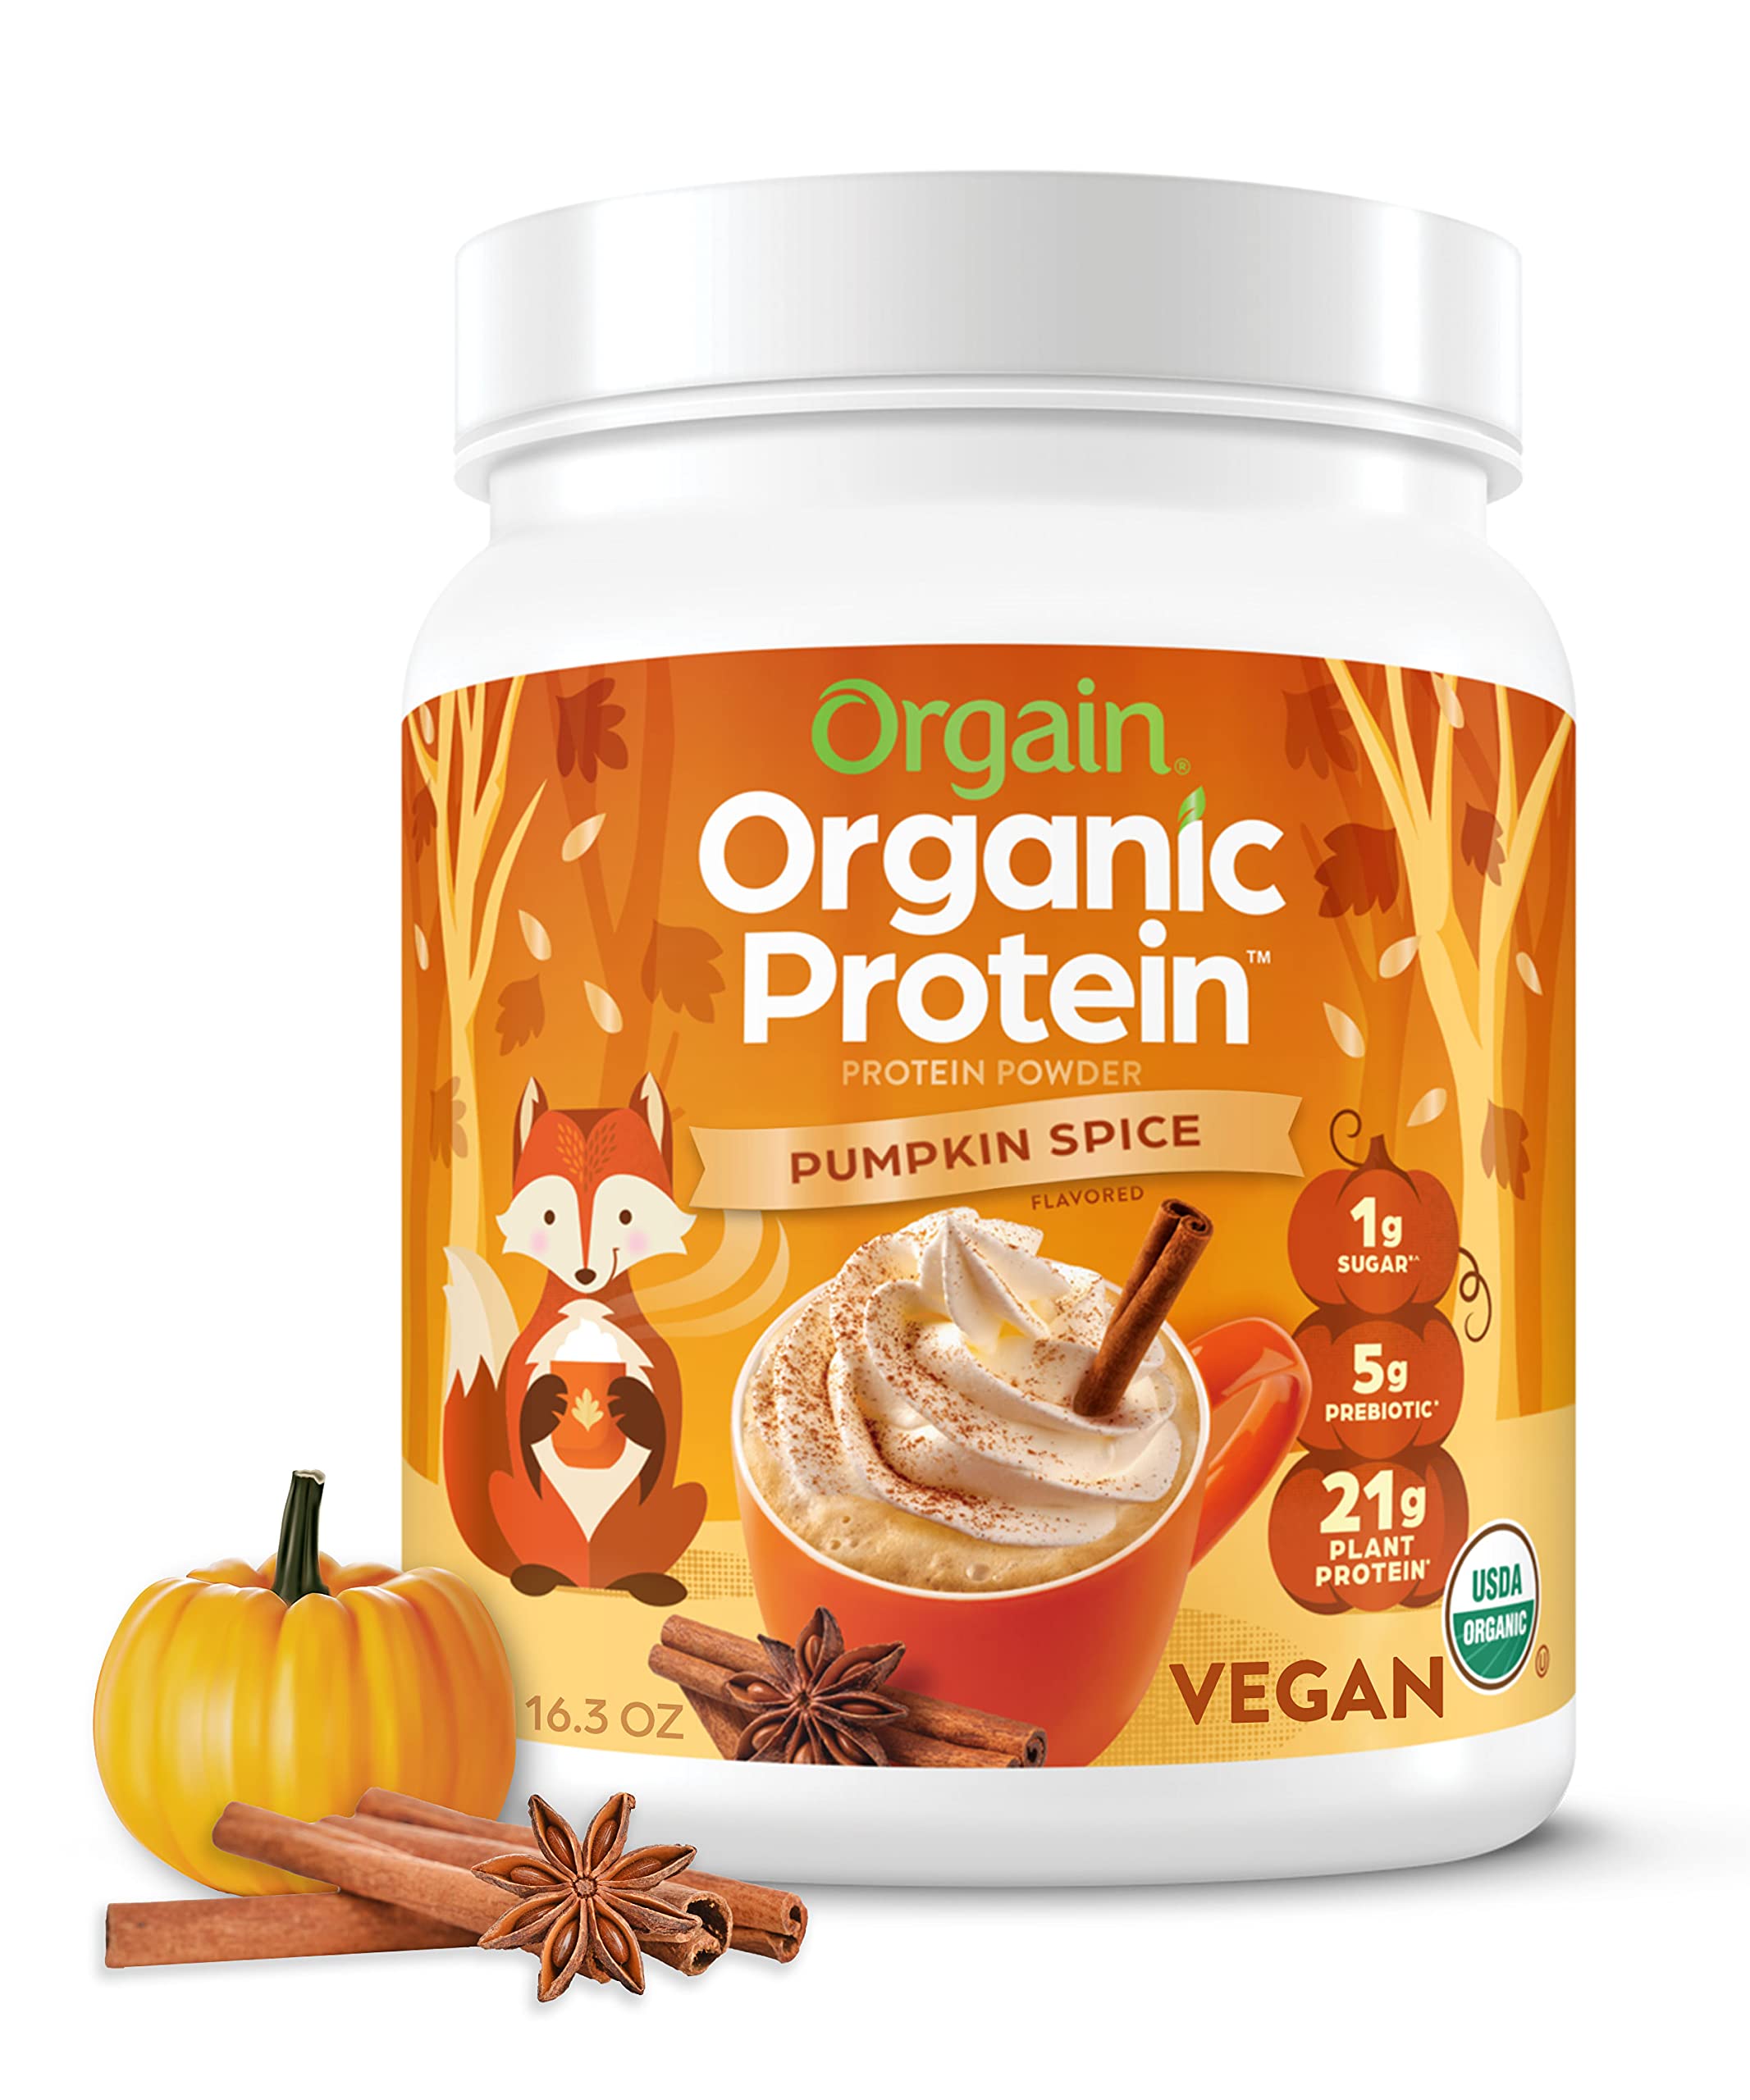 Orgain Organic Vegan Protein Powder, Pumpkin Spice - 21g Plant Based Protein, Gluten Free, Dairy Free, Lactose Free, Soy Free, No Sugar Added, Kosher, For Smoothies & Shakes - 1.02lb